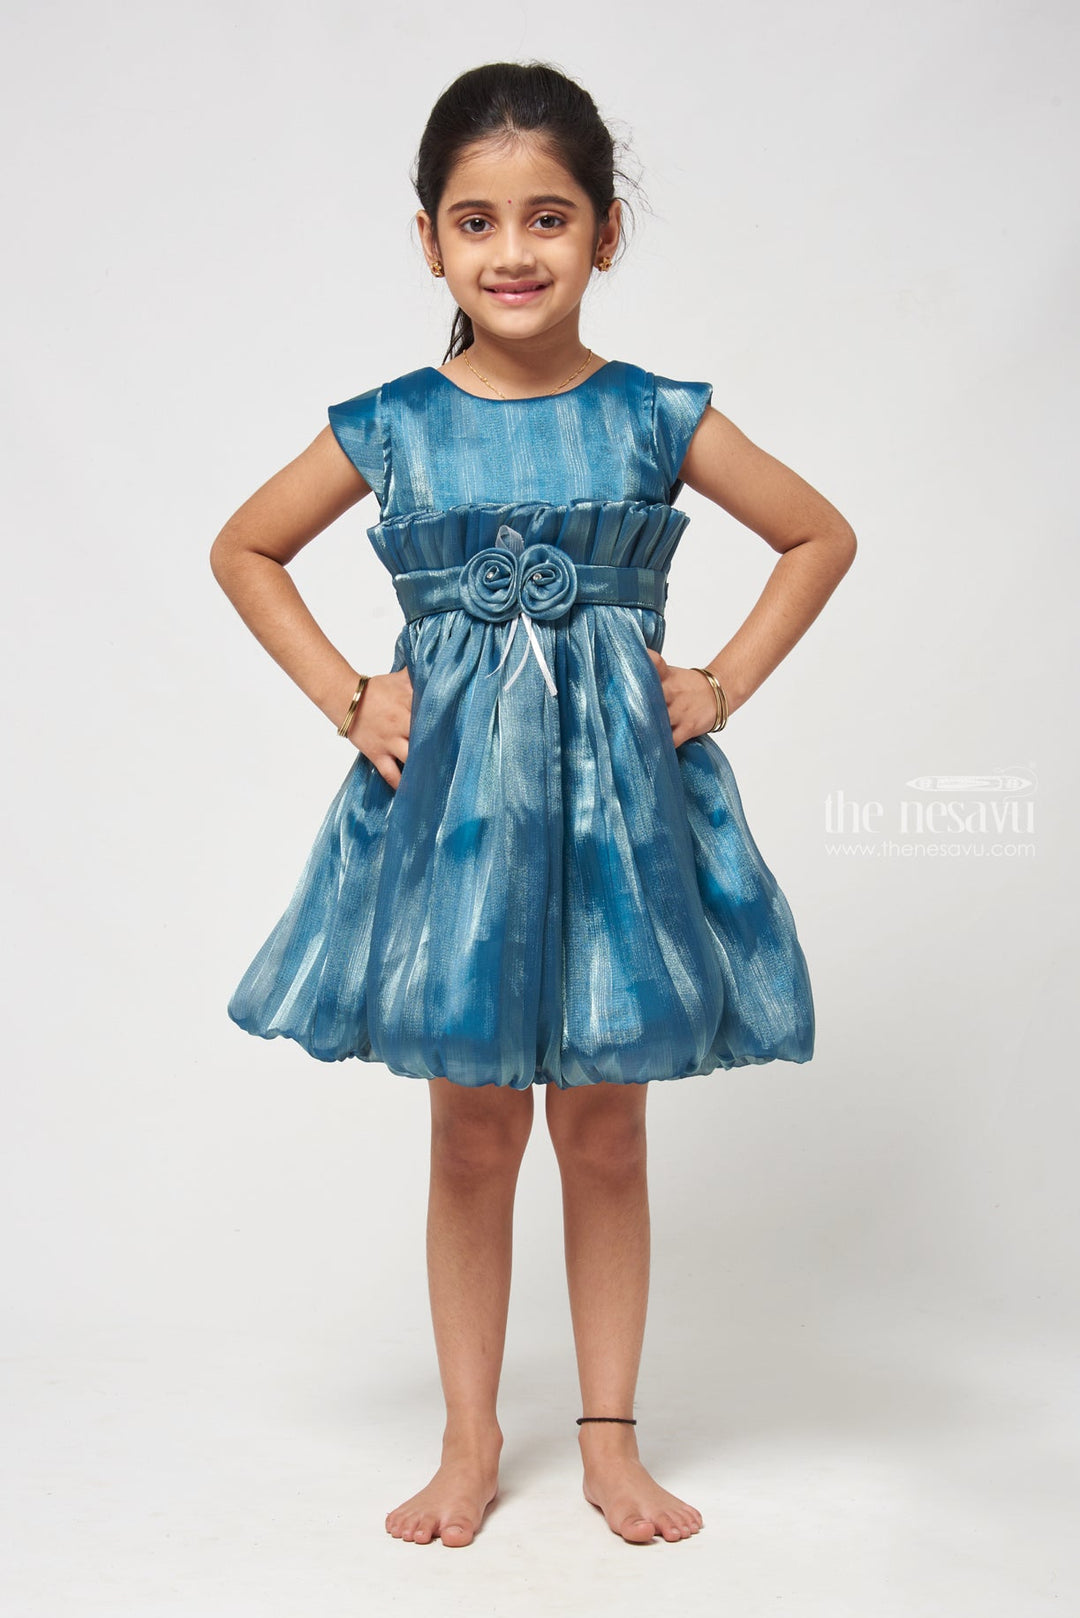 The Nesavu Girls Fancy Frock Flowy Dress for Girls Soft Delicate with Pleated Design and Ruffled Layers Nesavu 16 (1Y) / Blue / Organza GFC1121A-16 Ballroom-inspired Birthday Frock For Kids - Knee-length | The Nesavu